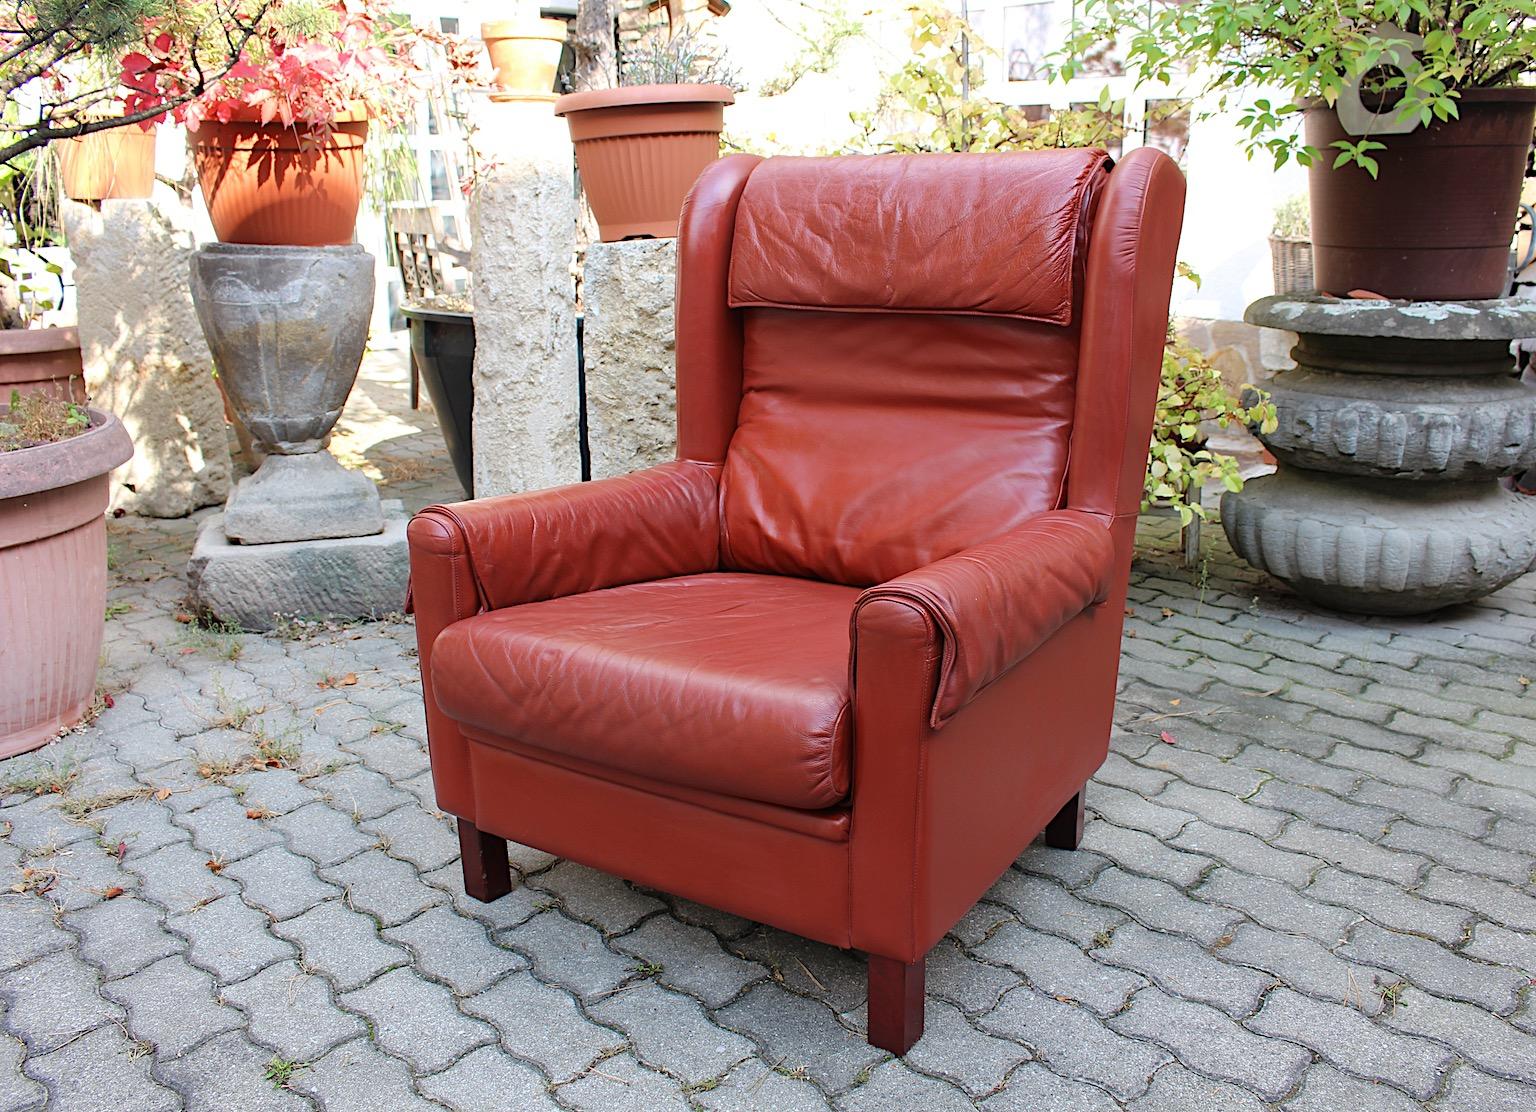 Leather Reddish Brown Vintage Wingback Chair Lounge Chair 1970s Austria In Good Condition For Sale In Vienna, AT